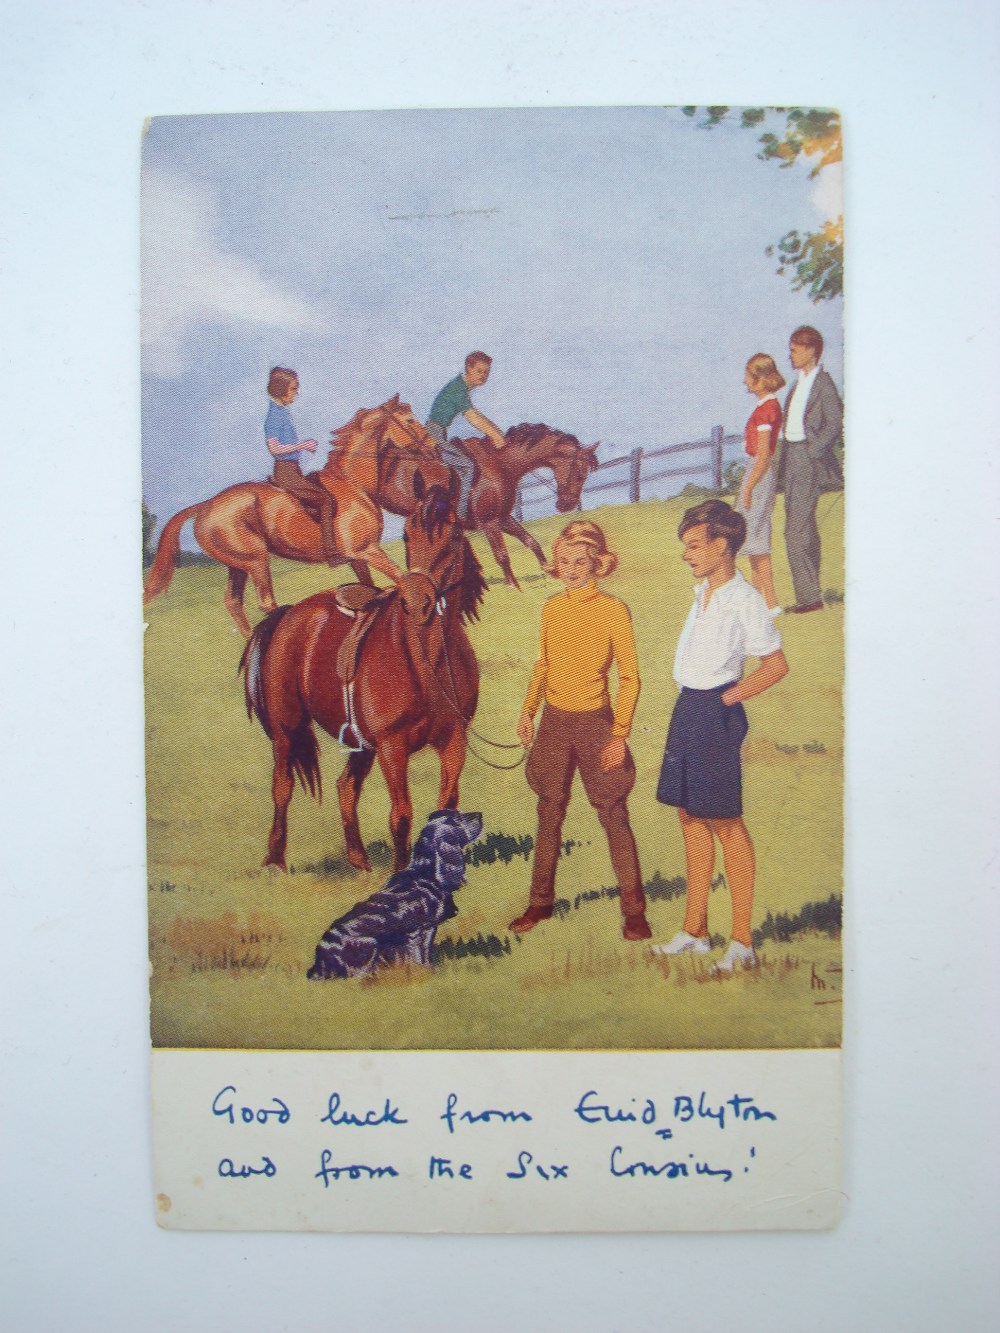 Enid Blyton.  A signed postcard with mes